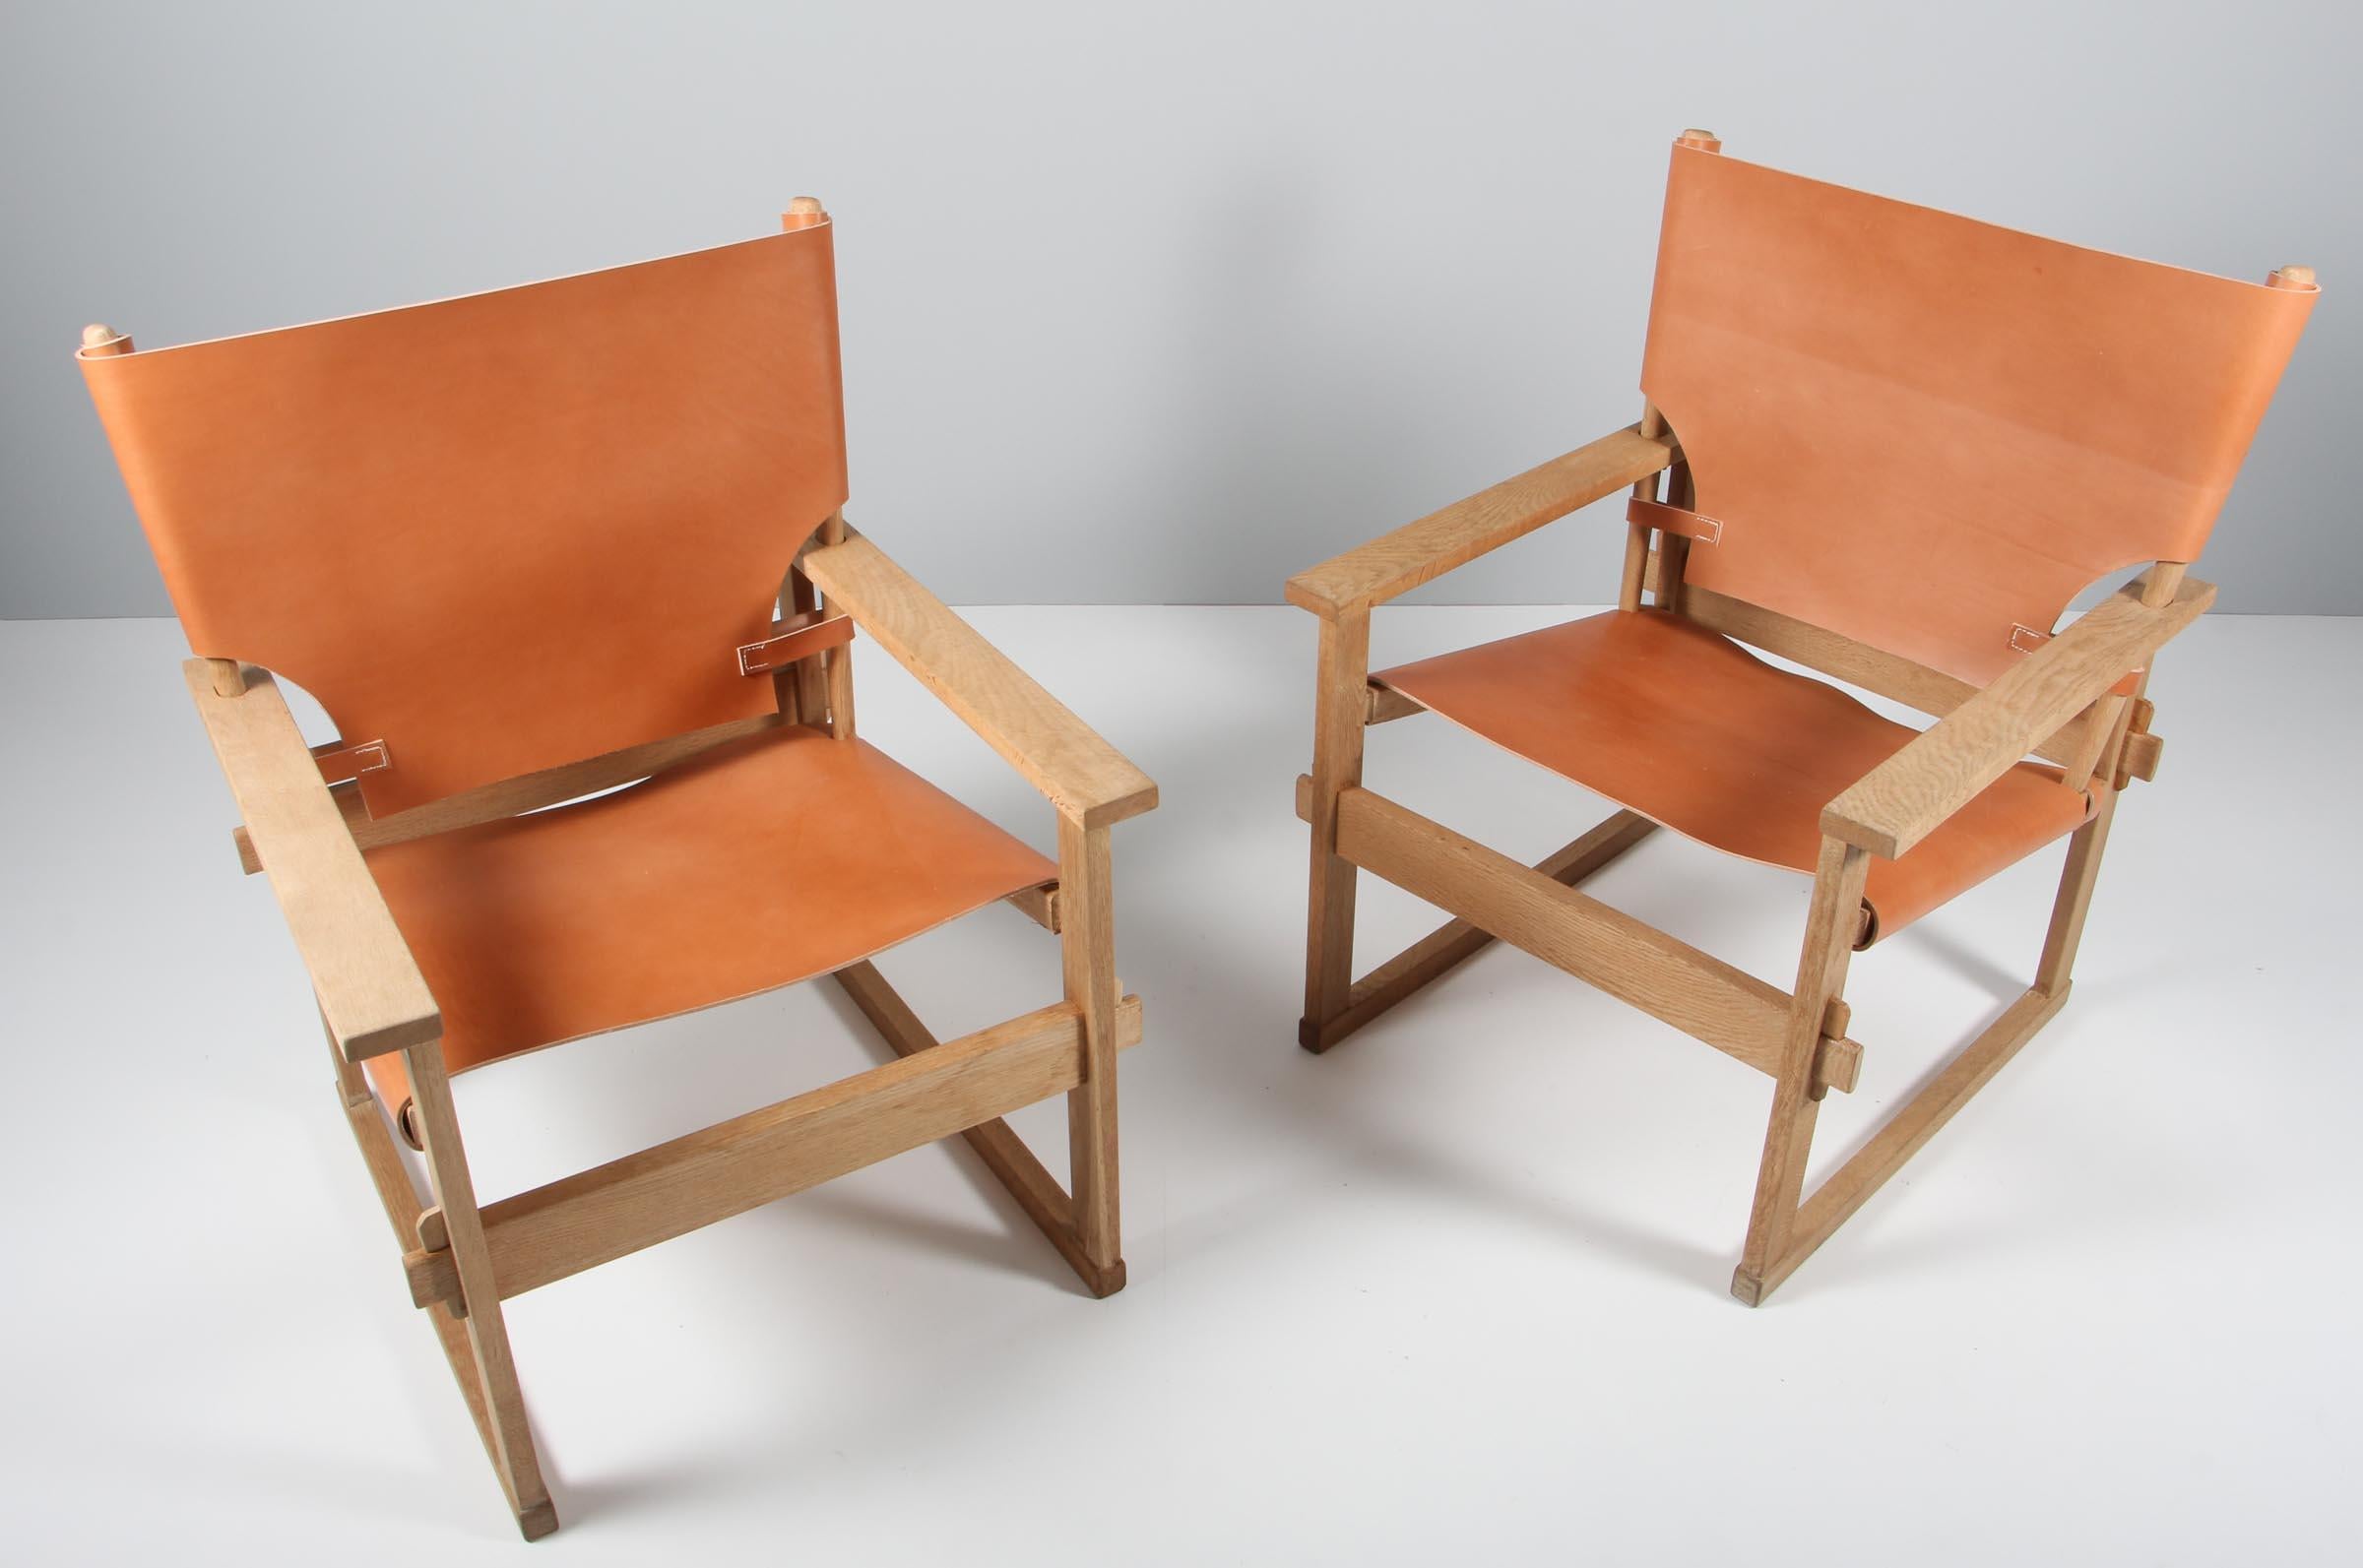 Kai Winding Safari / safari chair, frame of oak.

New upholstered with saddle leather.

Made by Poul Hundevad.